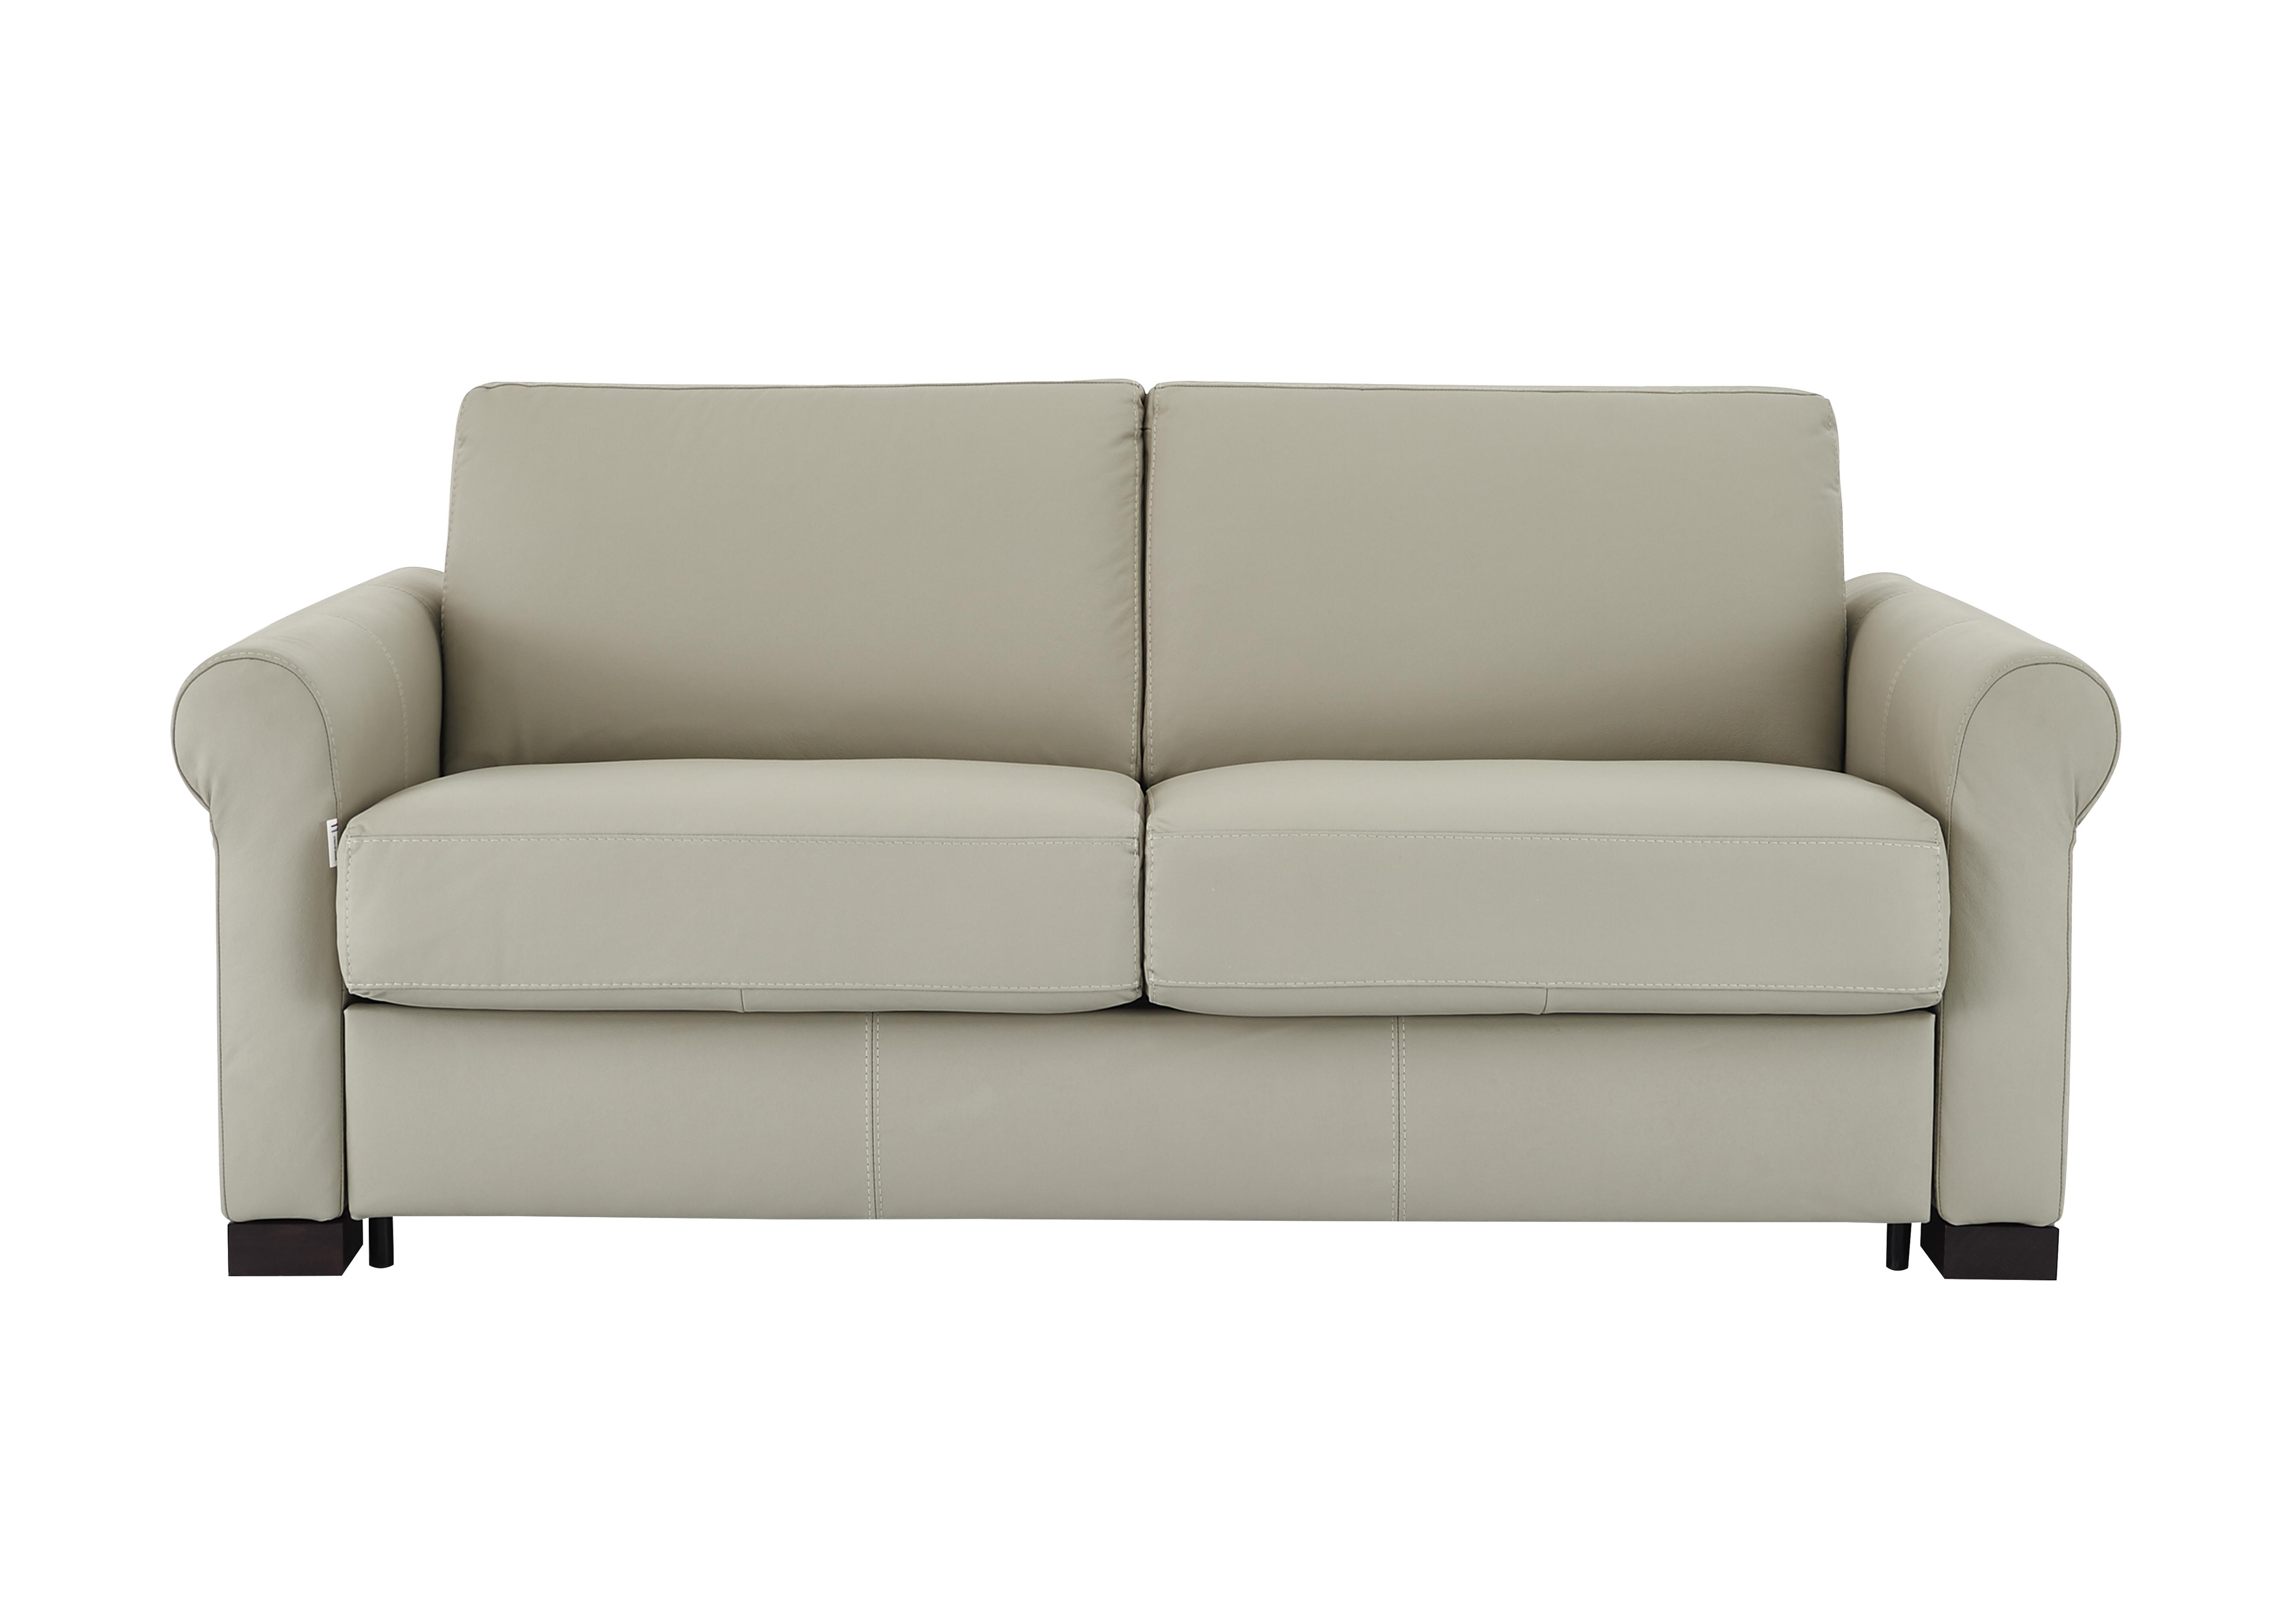 Alcova 2 Seater Leather Sofa Bed with Scroll Arms in Torello Tortora 328 on Furniture Village